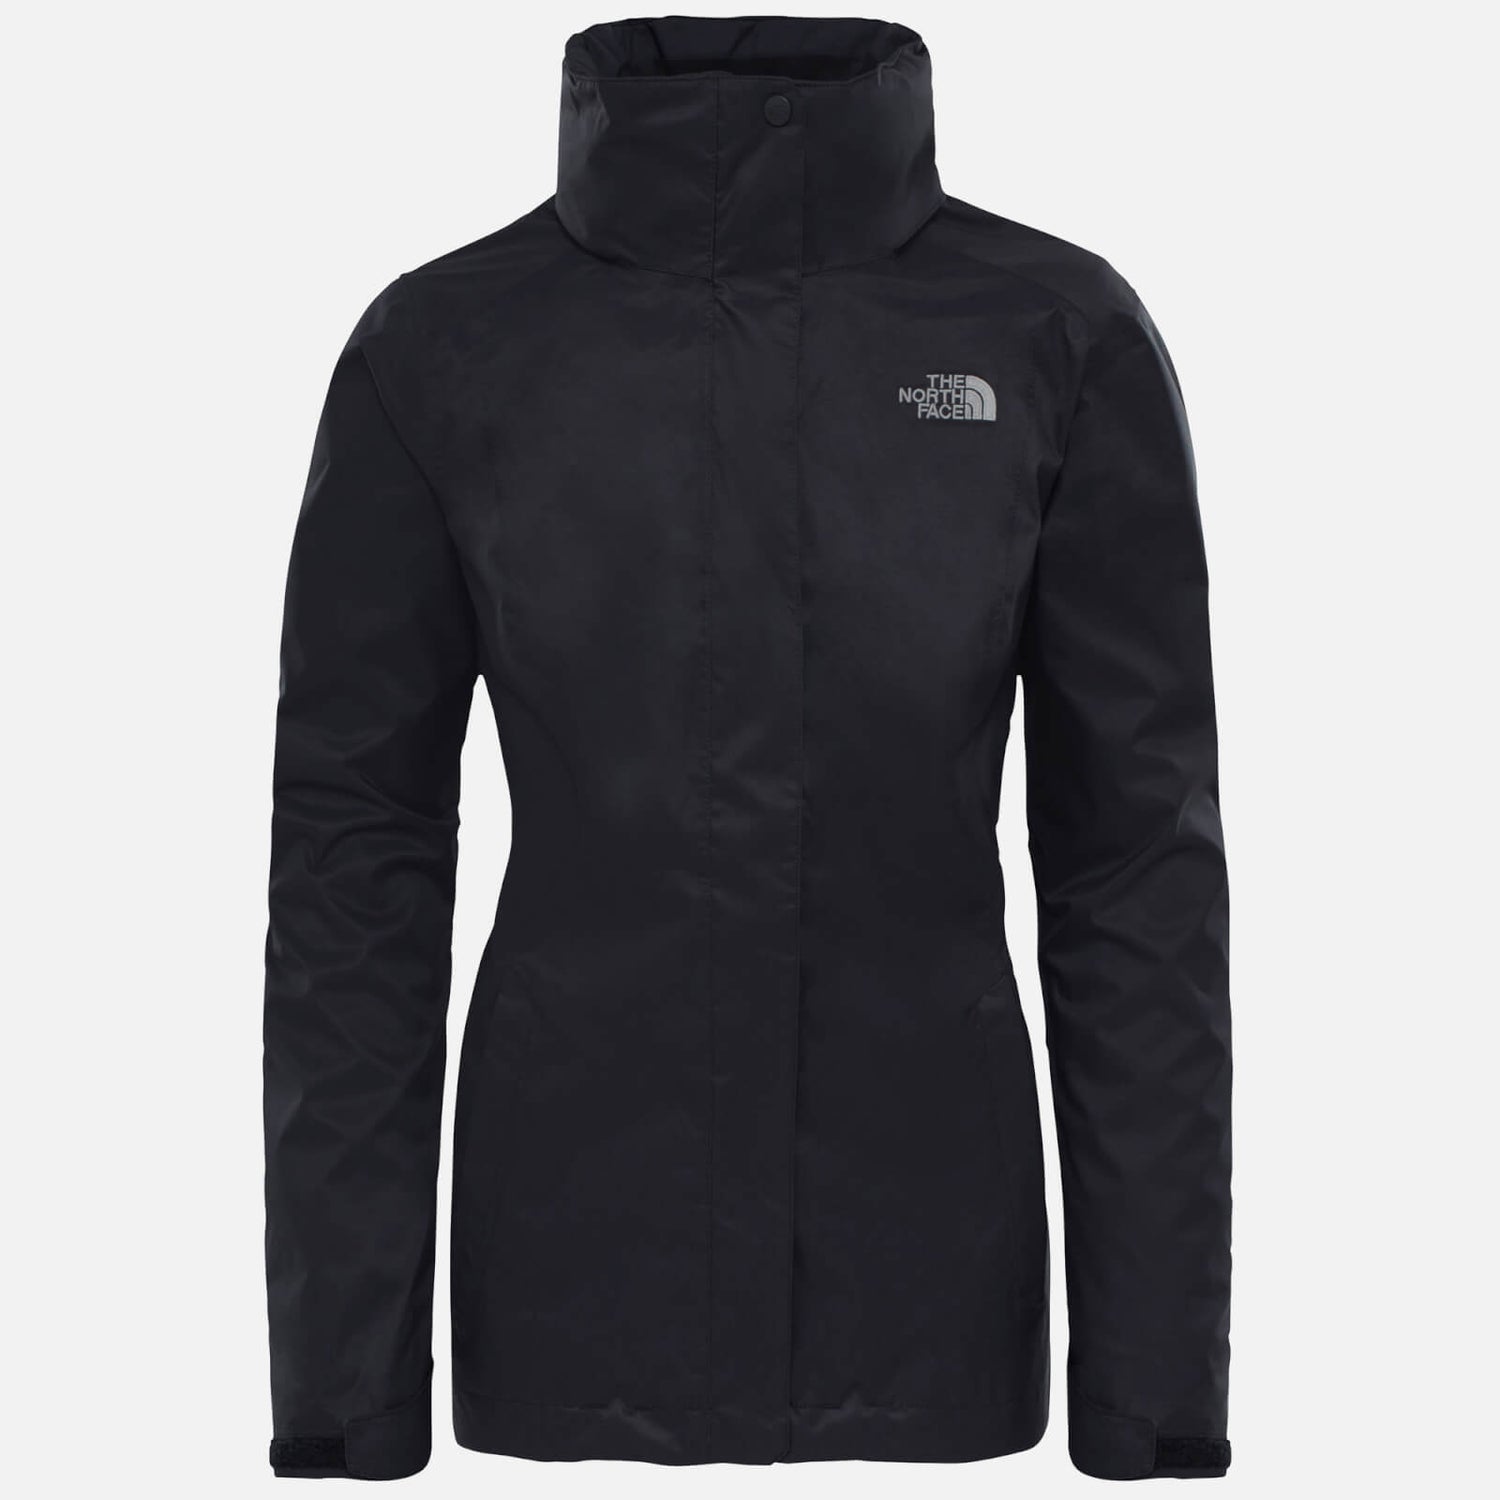 The North Face Women's Evolve Ii Triclimate Jacket - Black - S